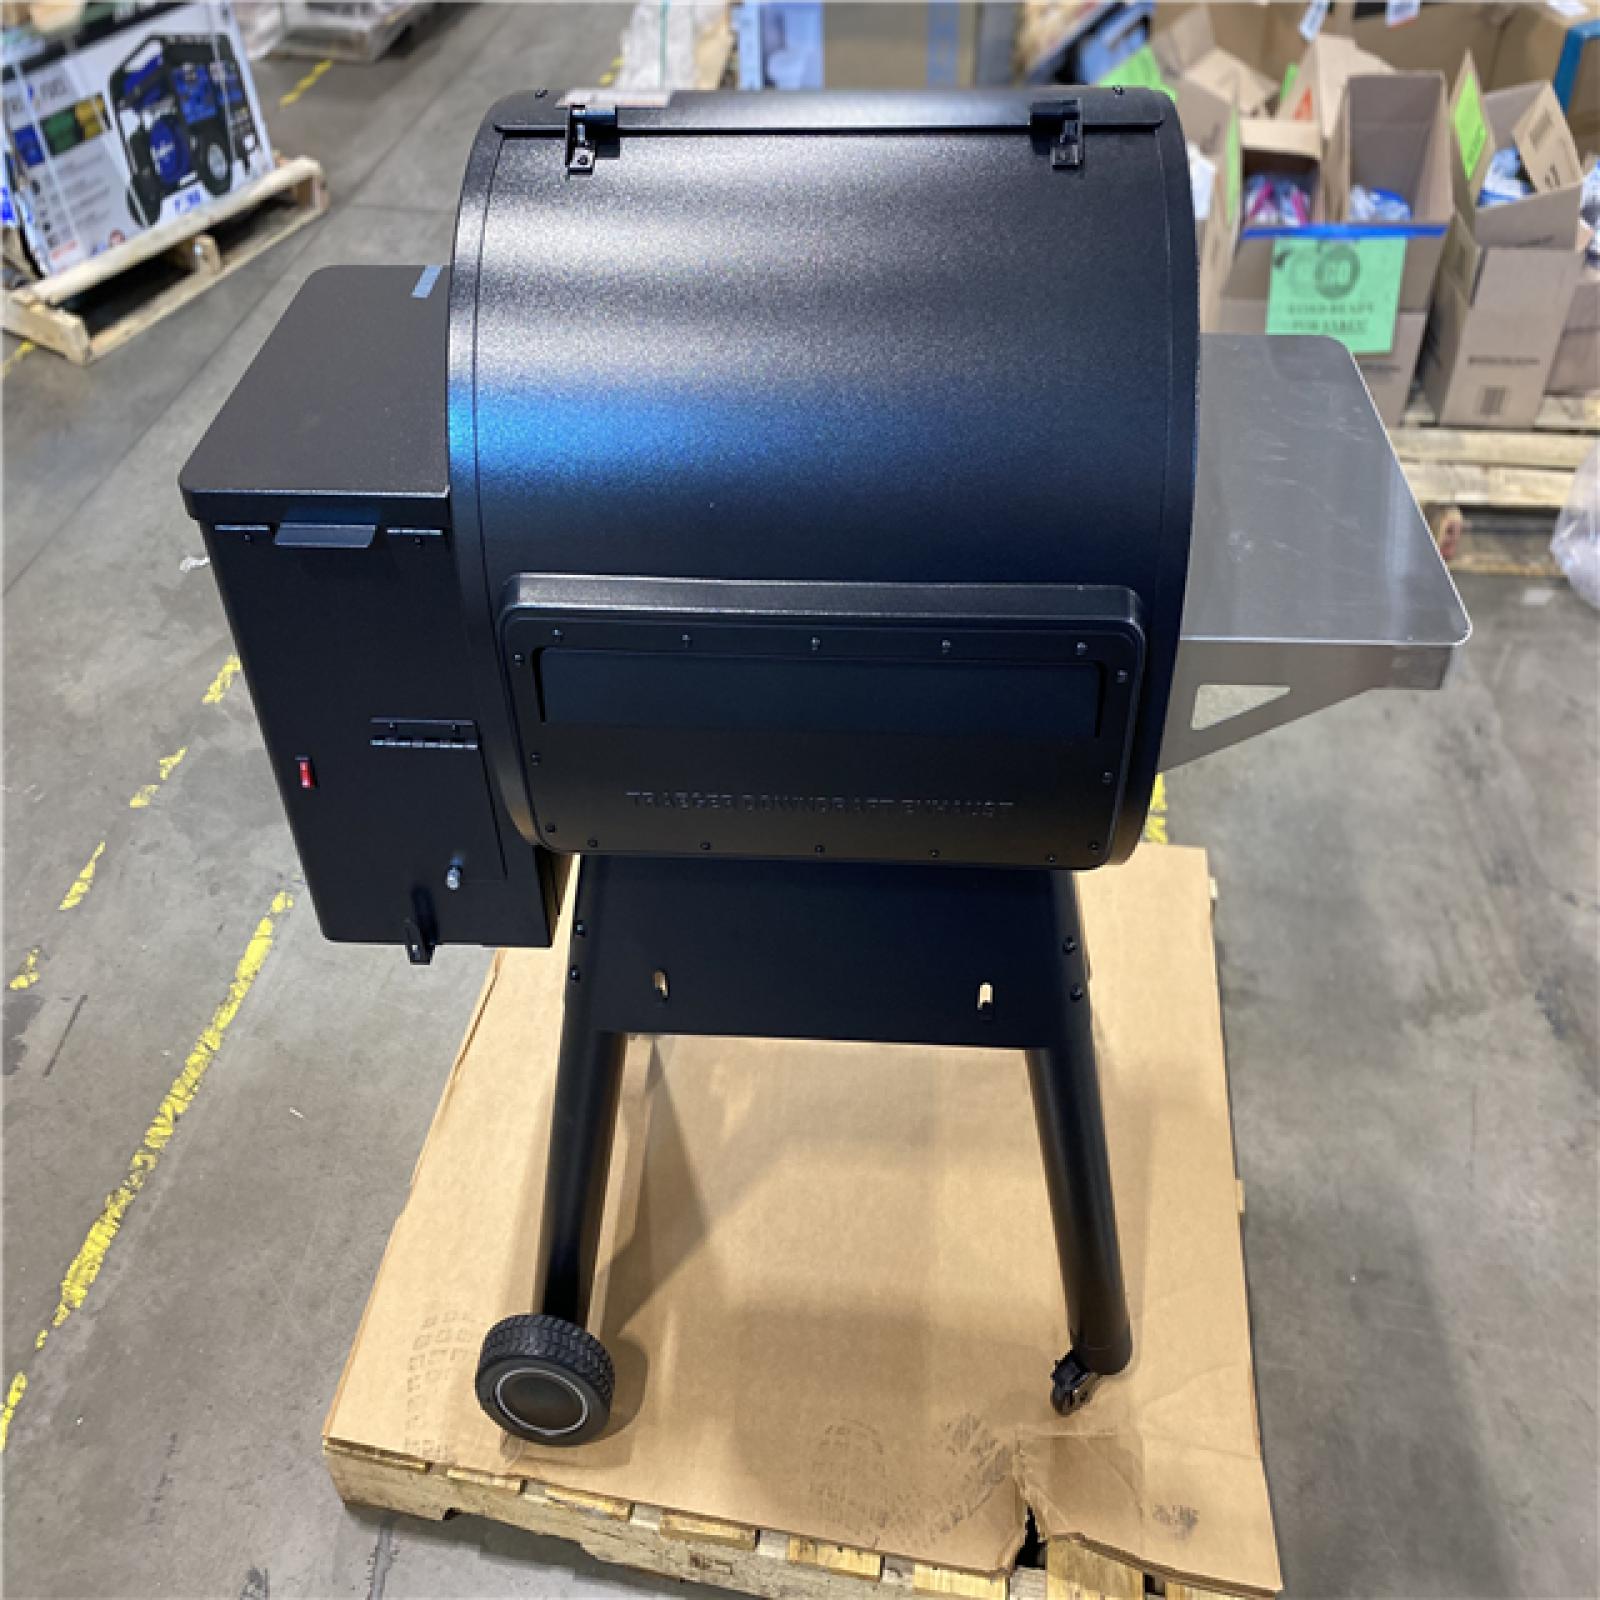 DALLAS LOCATION - Traeger Ironwood 650 Wifi Pellet Grill and Smoker in Black